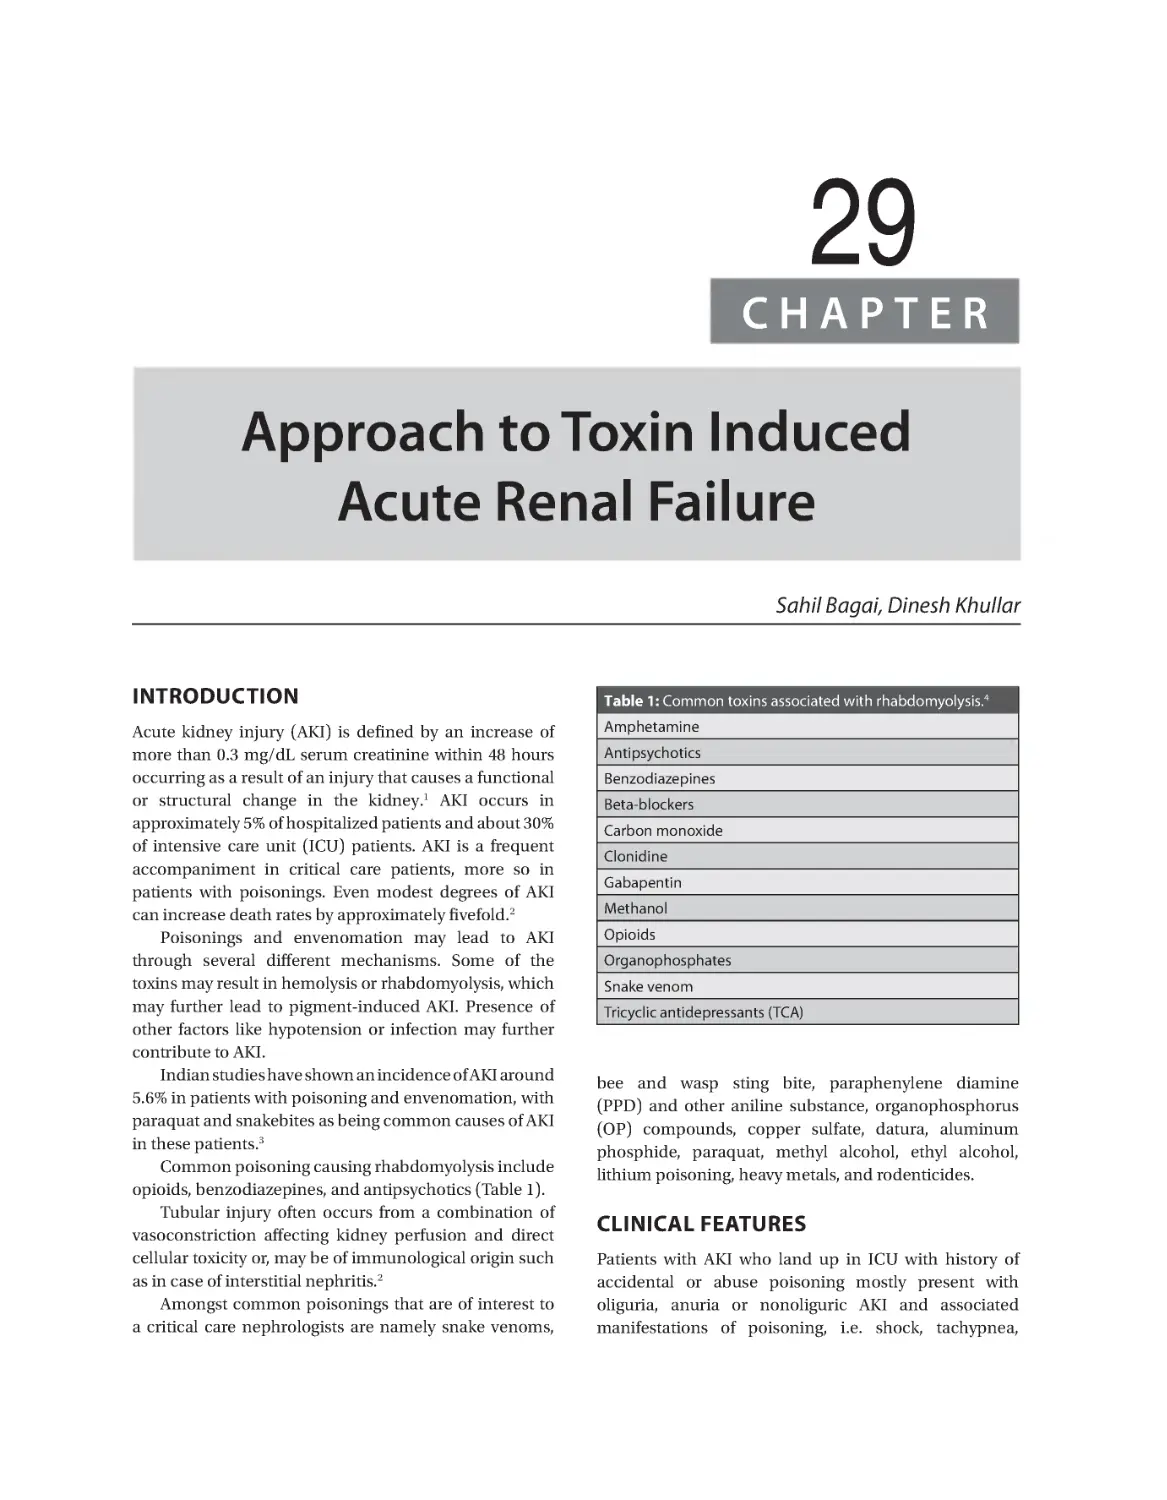 Chapter 29: Approach to Toxin Induced Acute Renal Failure